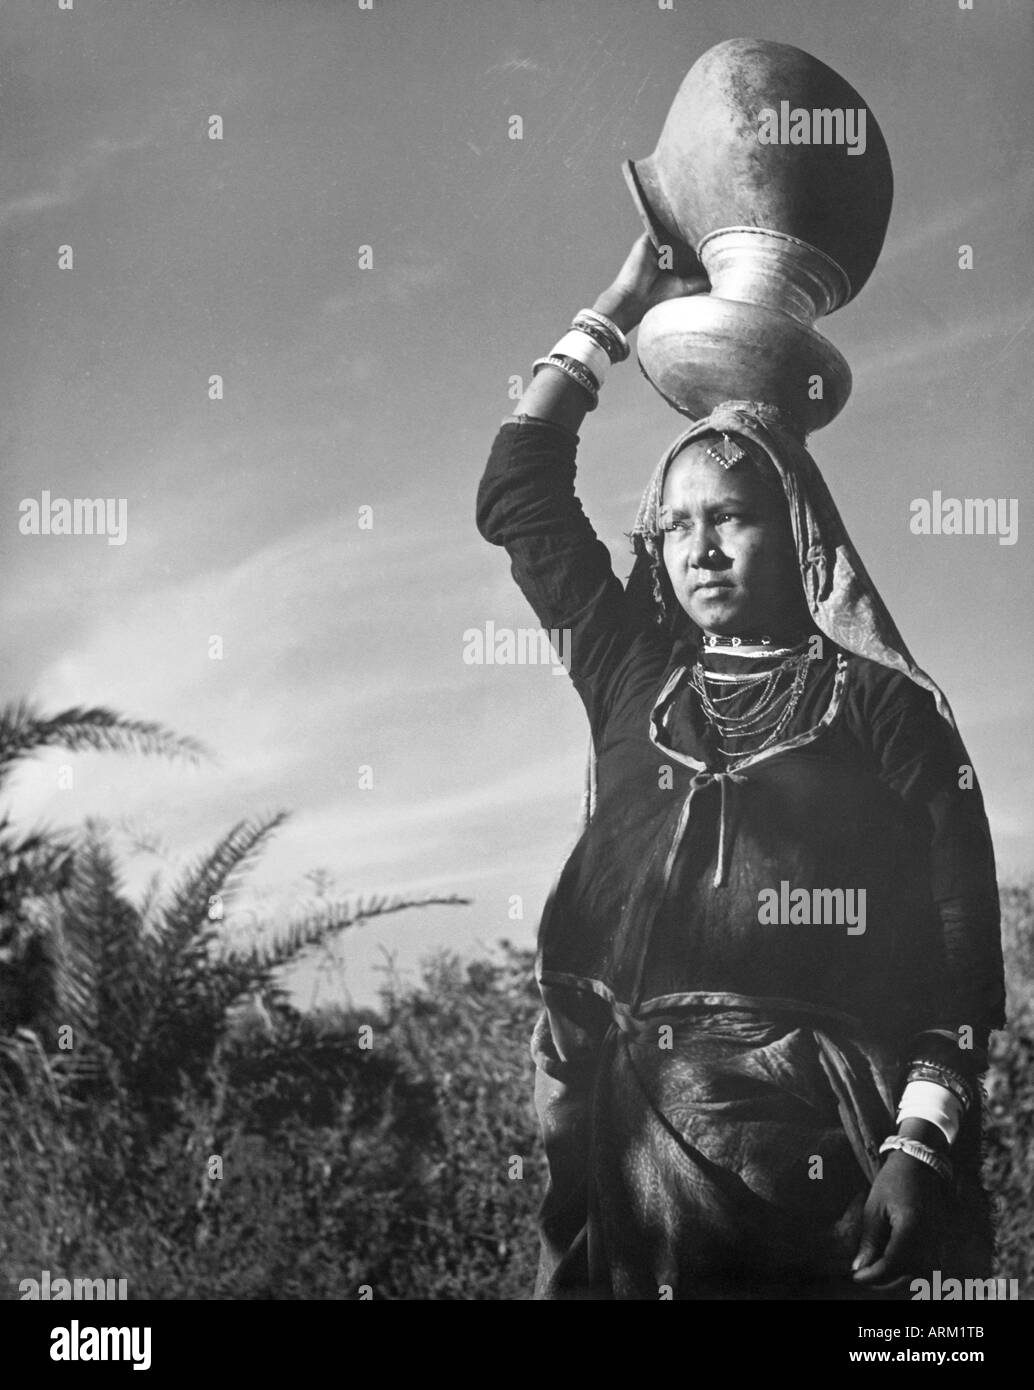 VRB101442 Indian woman with water pot on head at Rajasthan India 1940 s Stock Photo